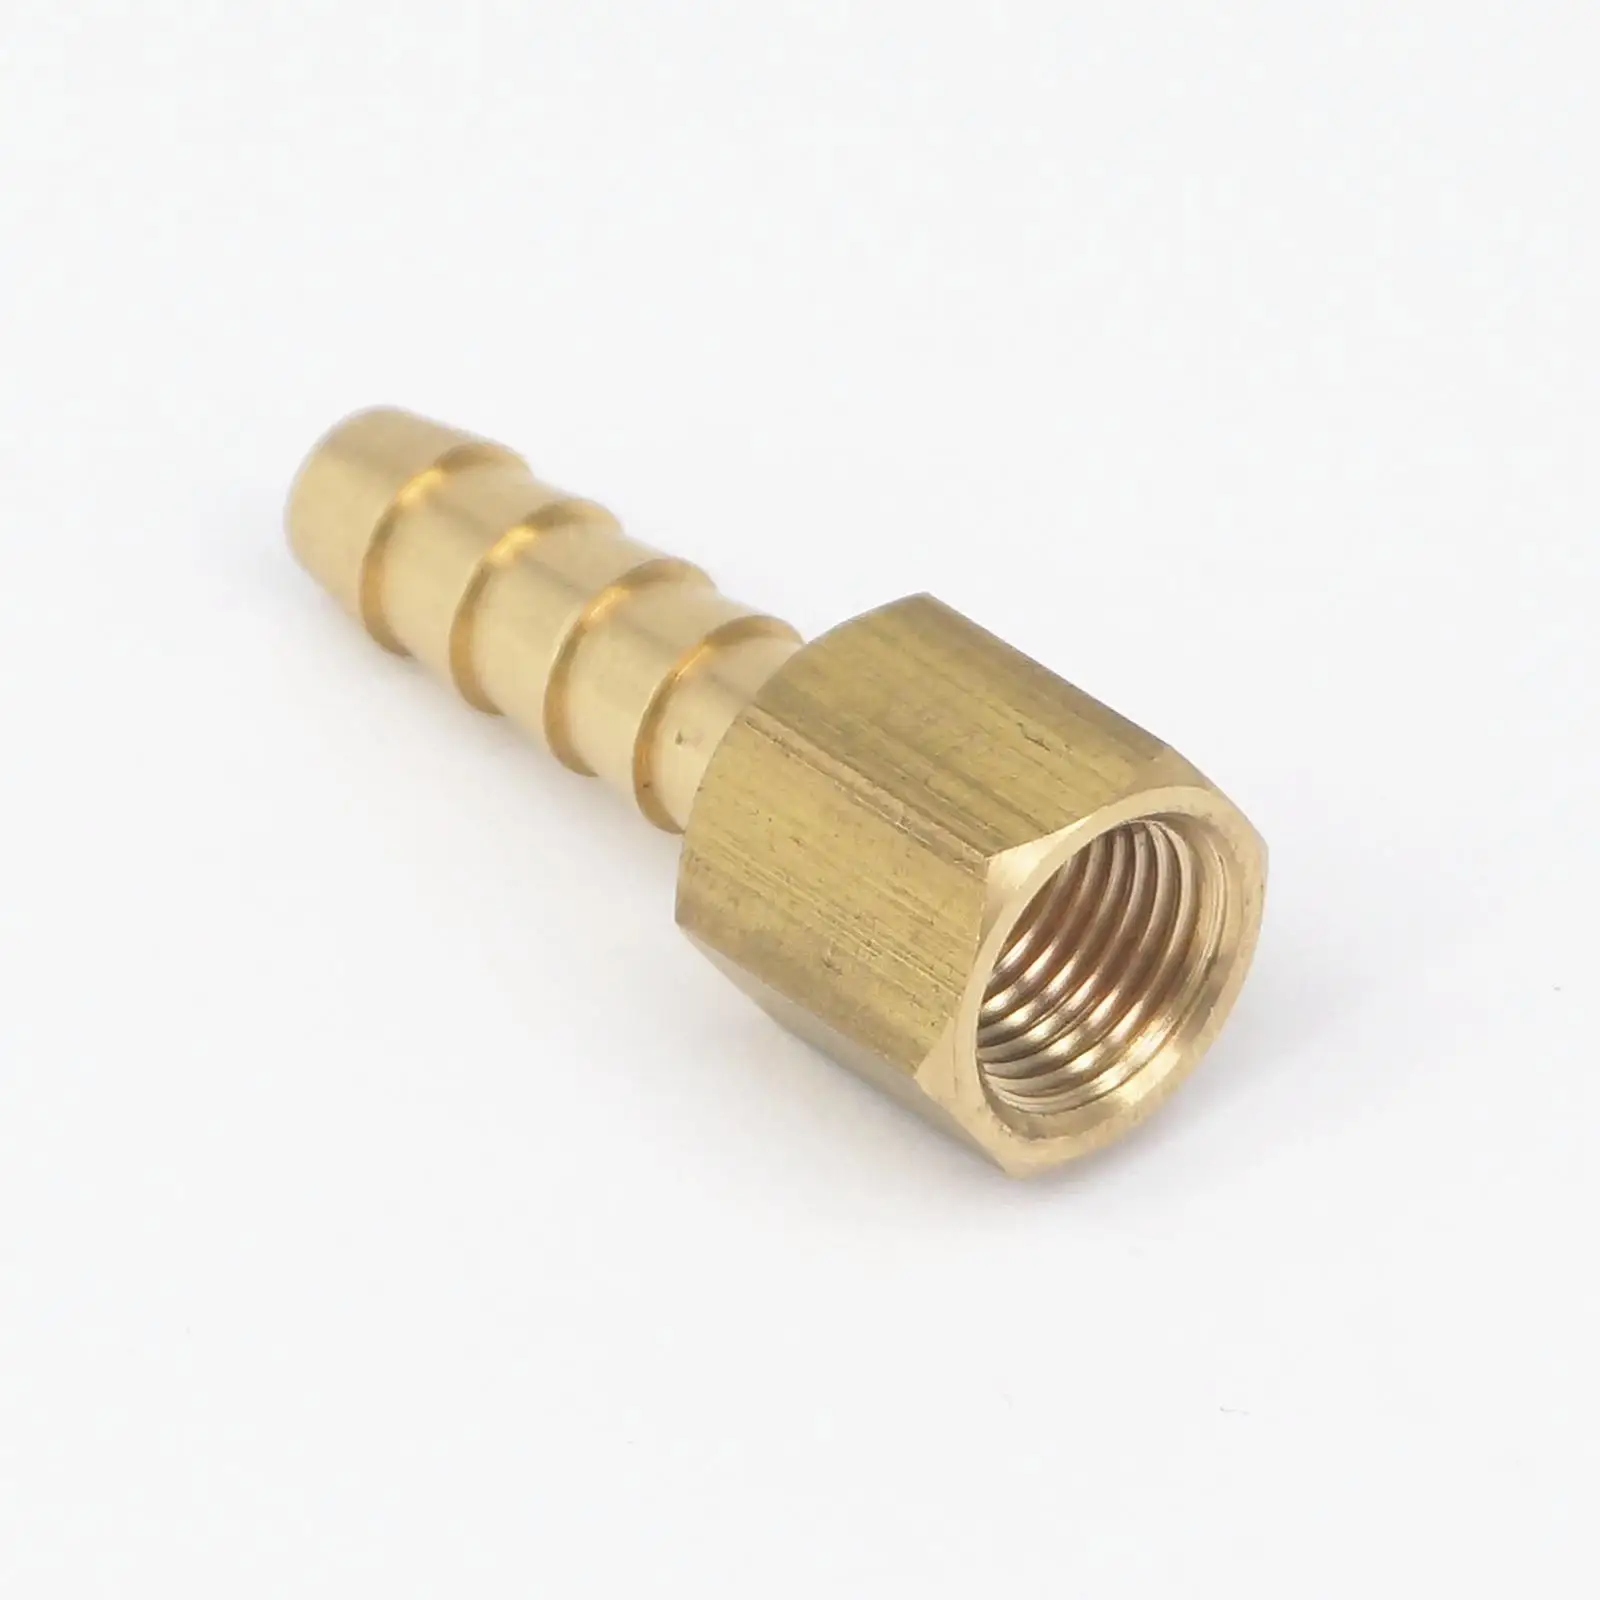 Adapter TOUHIA 7/16 Barb x 1/8 NPT Male Pipe Brass Hose Fitting 5PCS 